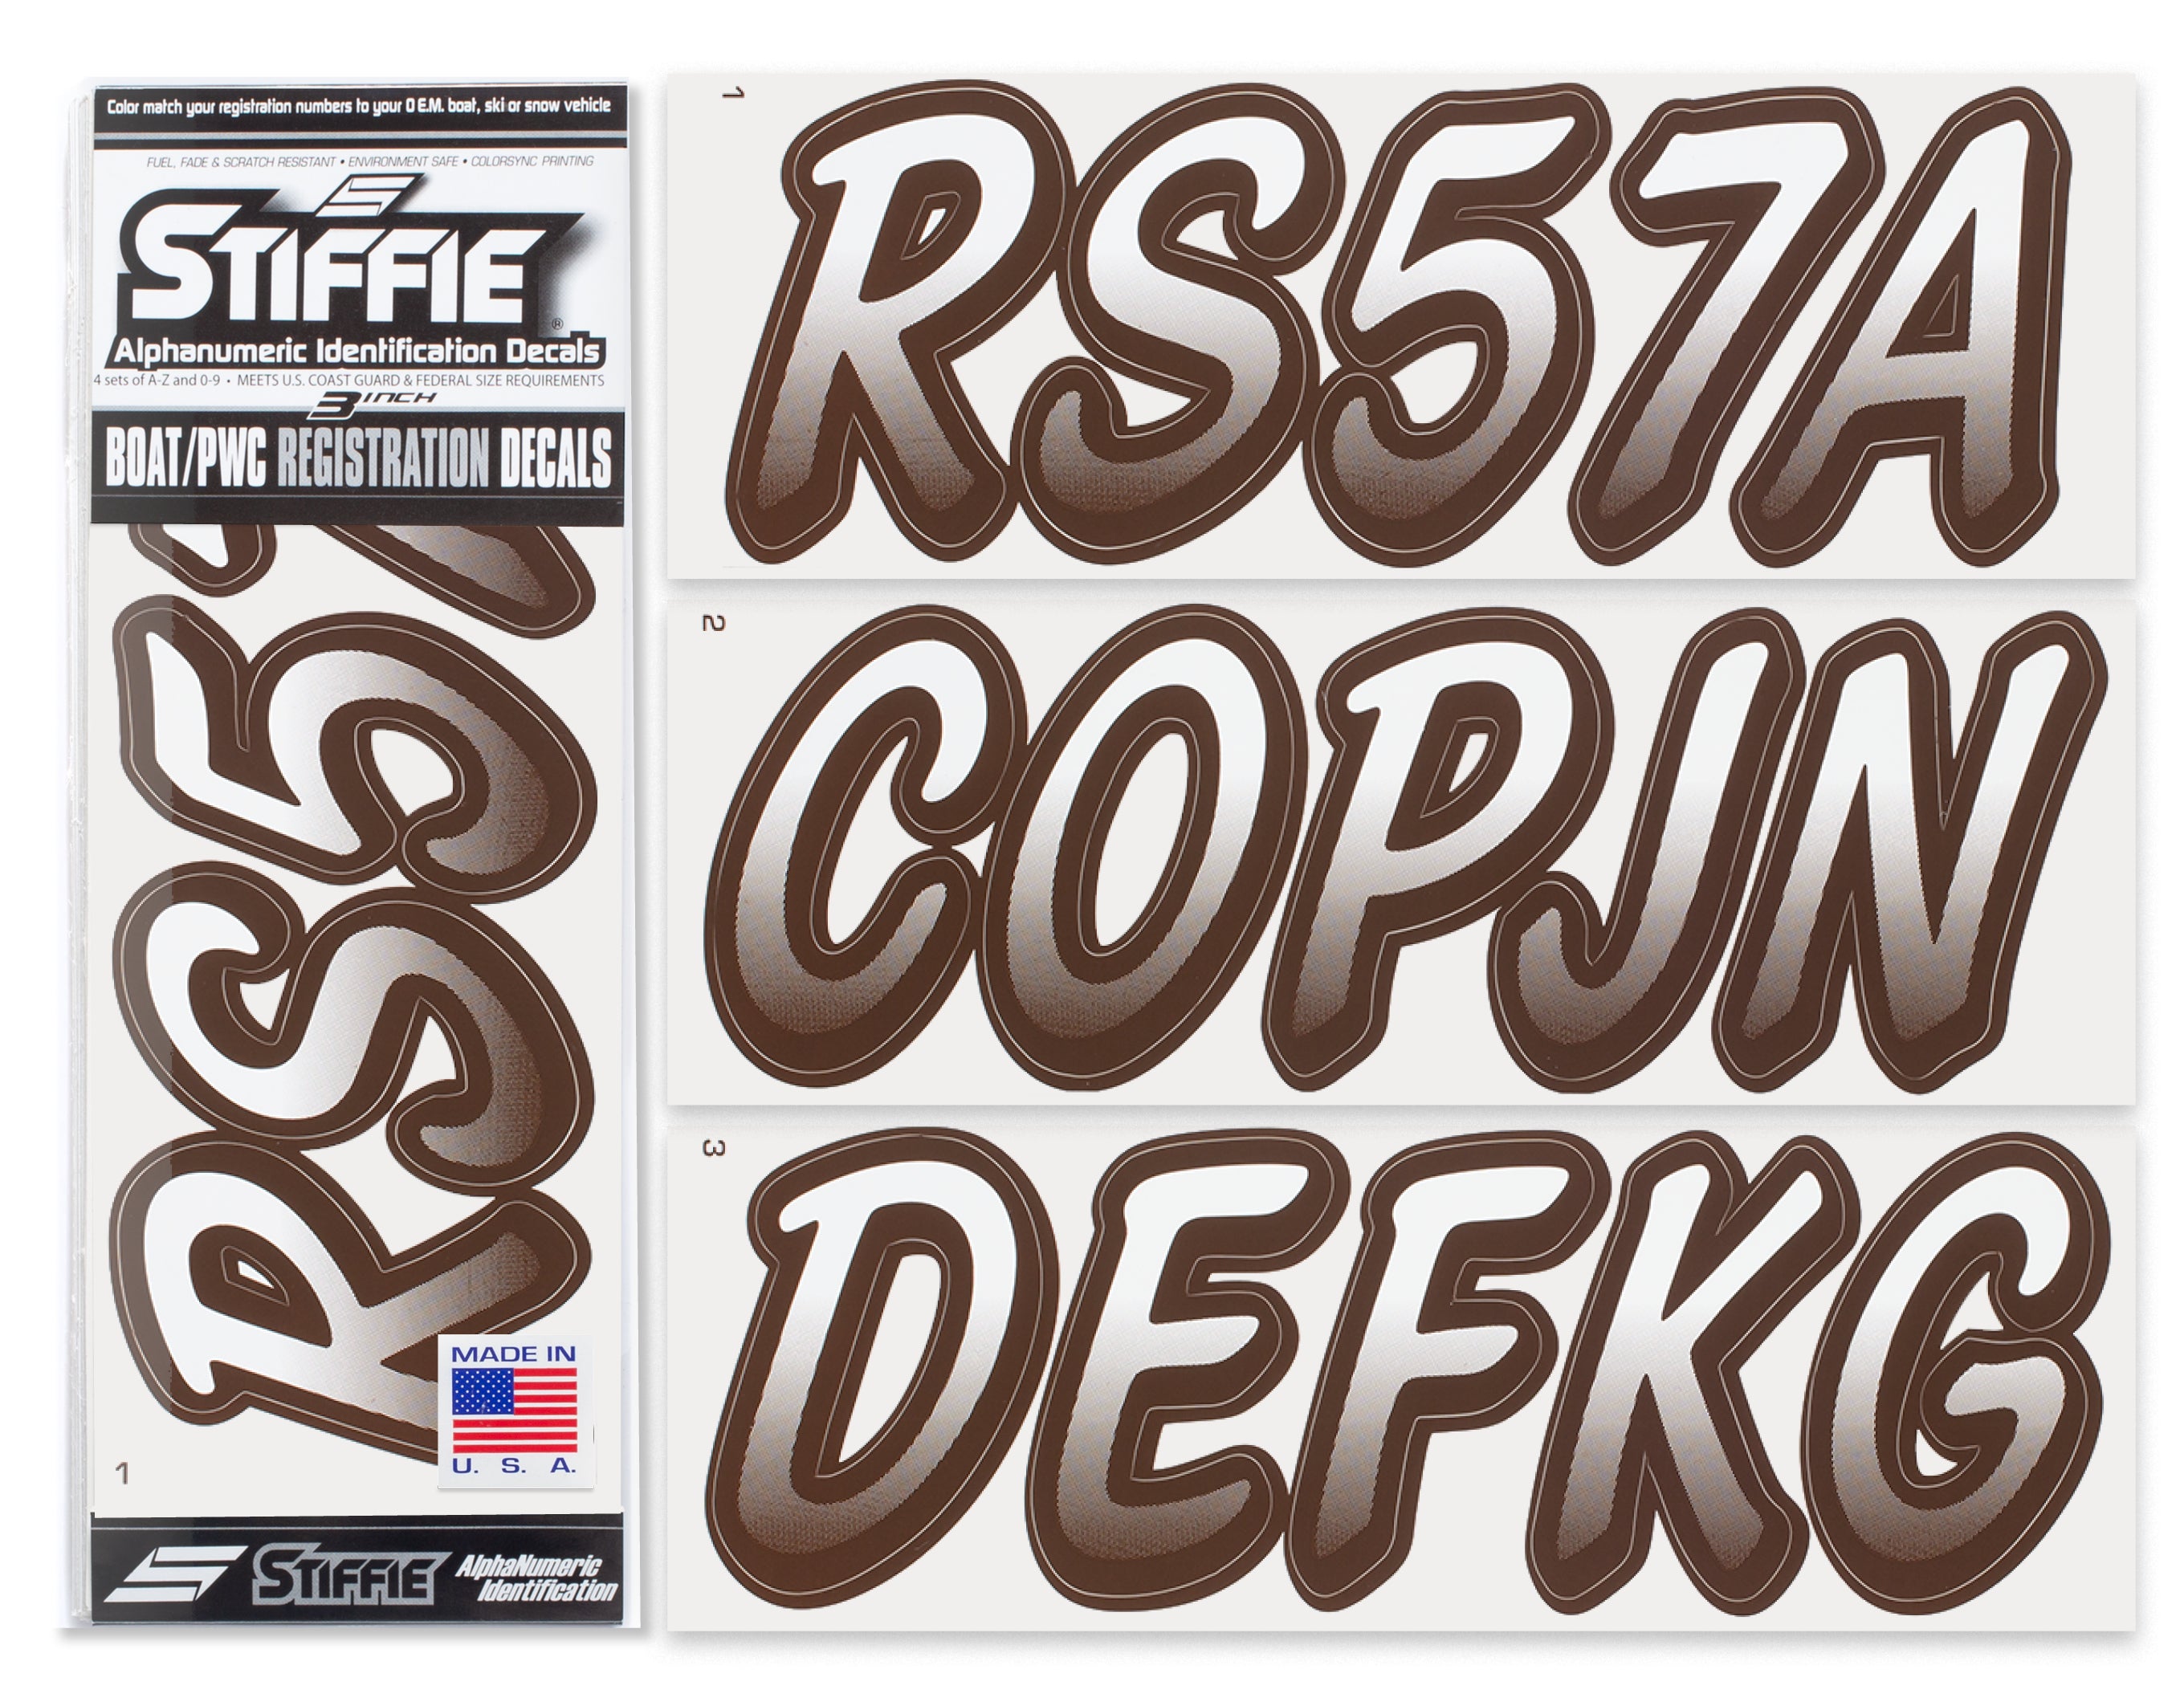 STIFFIE Whipline White /Espresso Brown 3" Alpha-Numeric Registration Identification Numbers Stickers Decals for Boats & Personal Watercraft